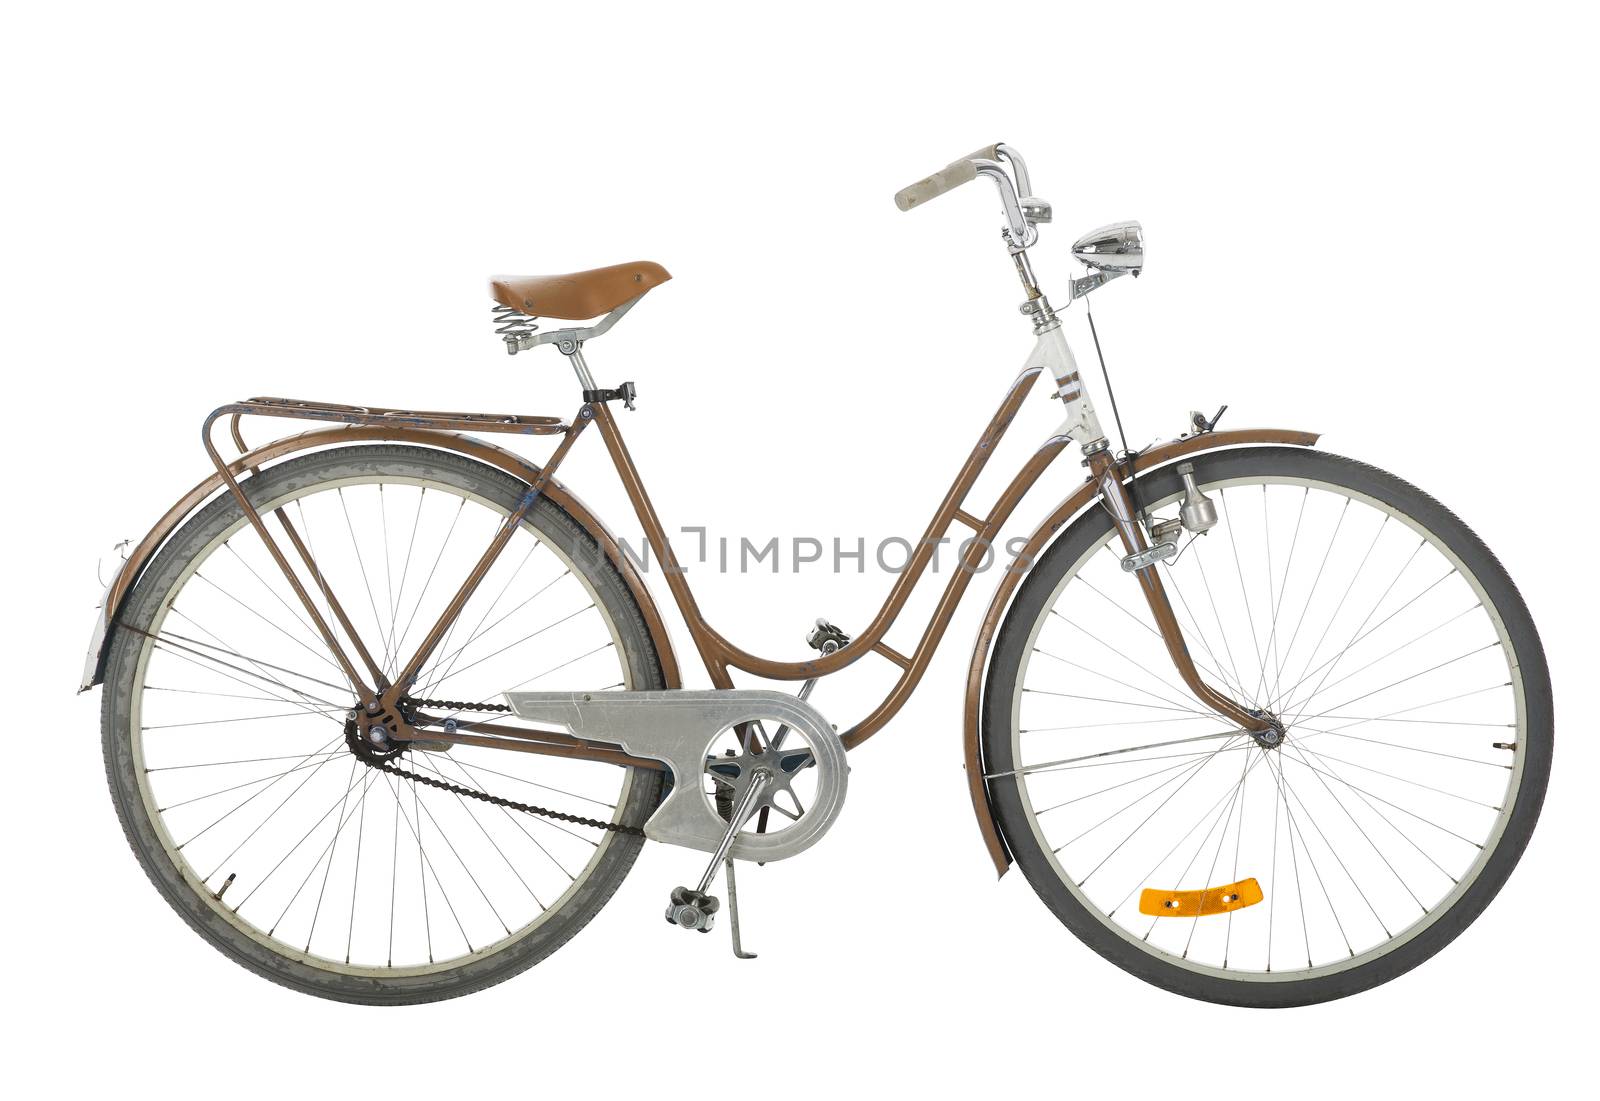 Brown Old fashioned bicycle by gemenacom